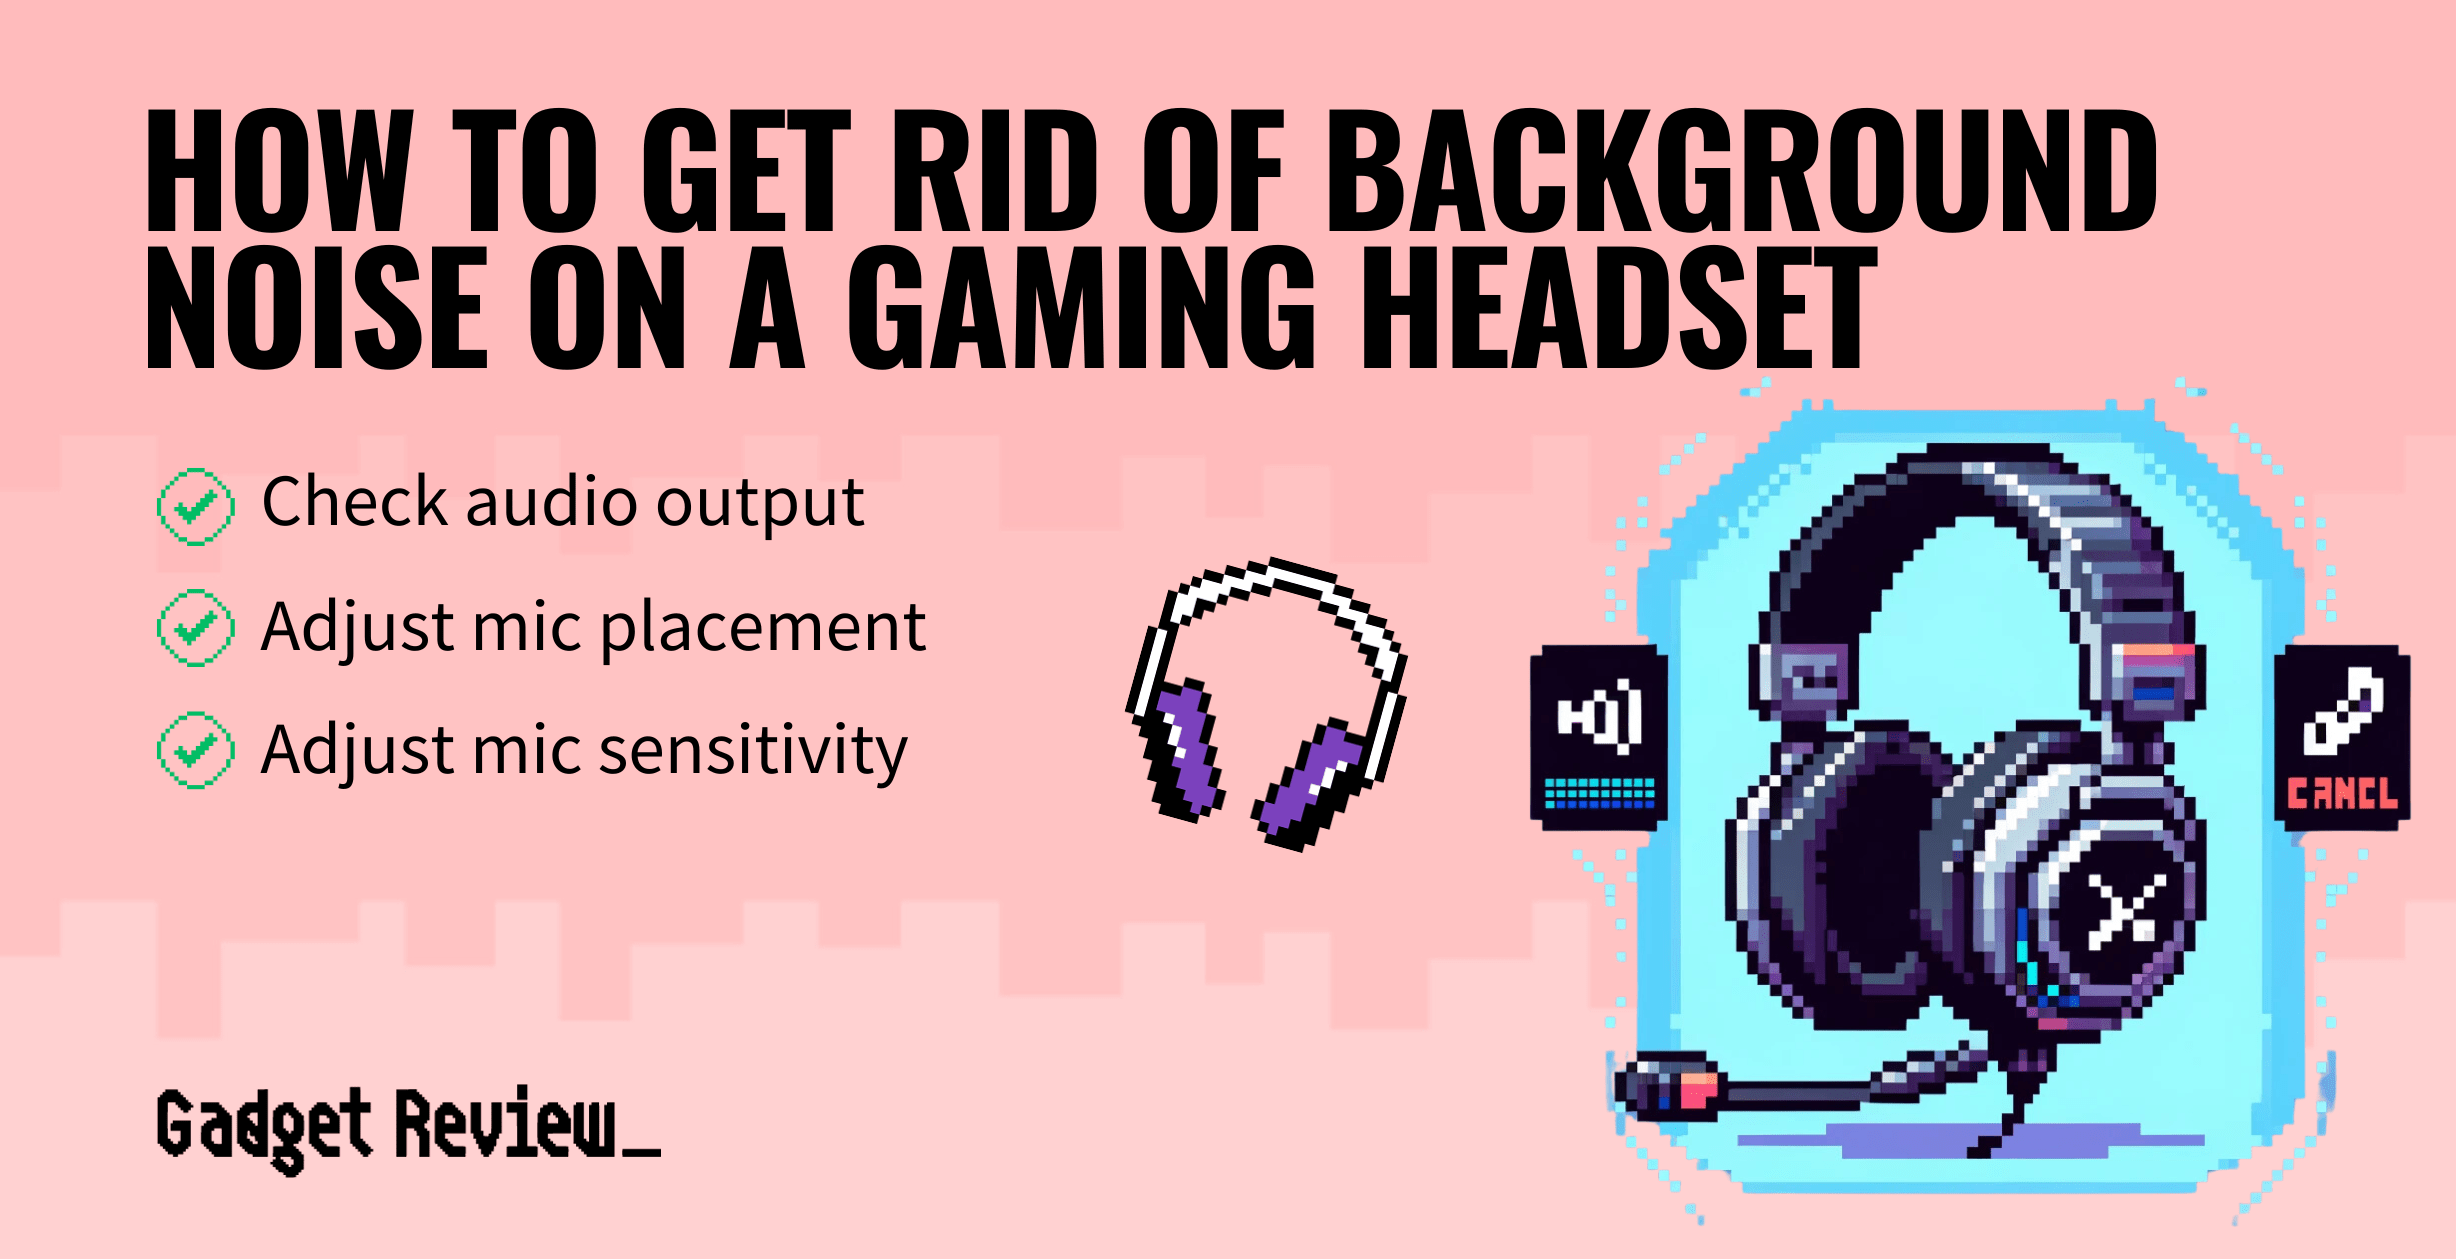 How to Get Rid of Background Noise on a Gaming Headset